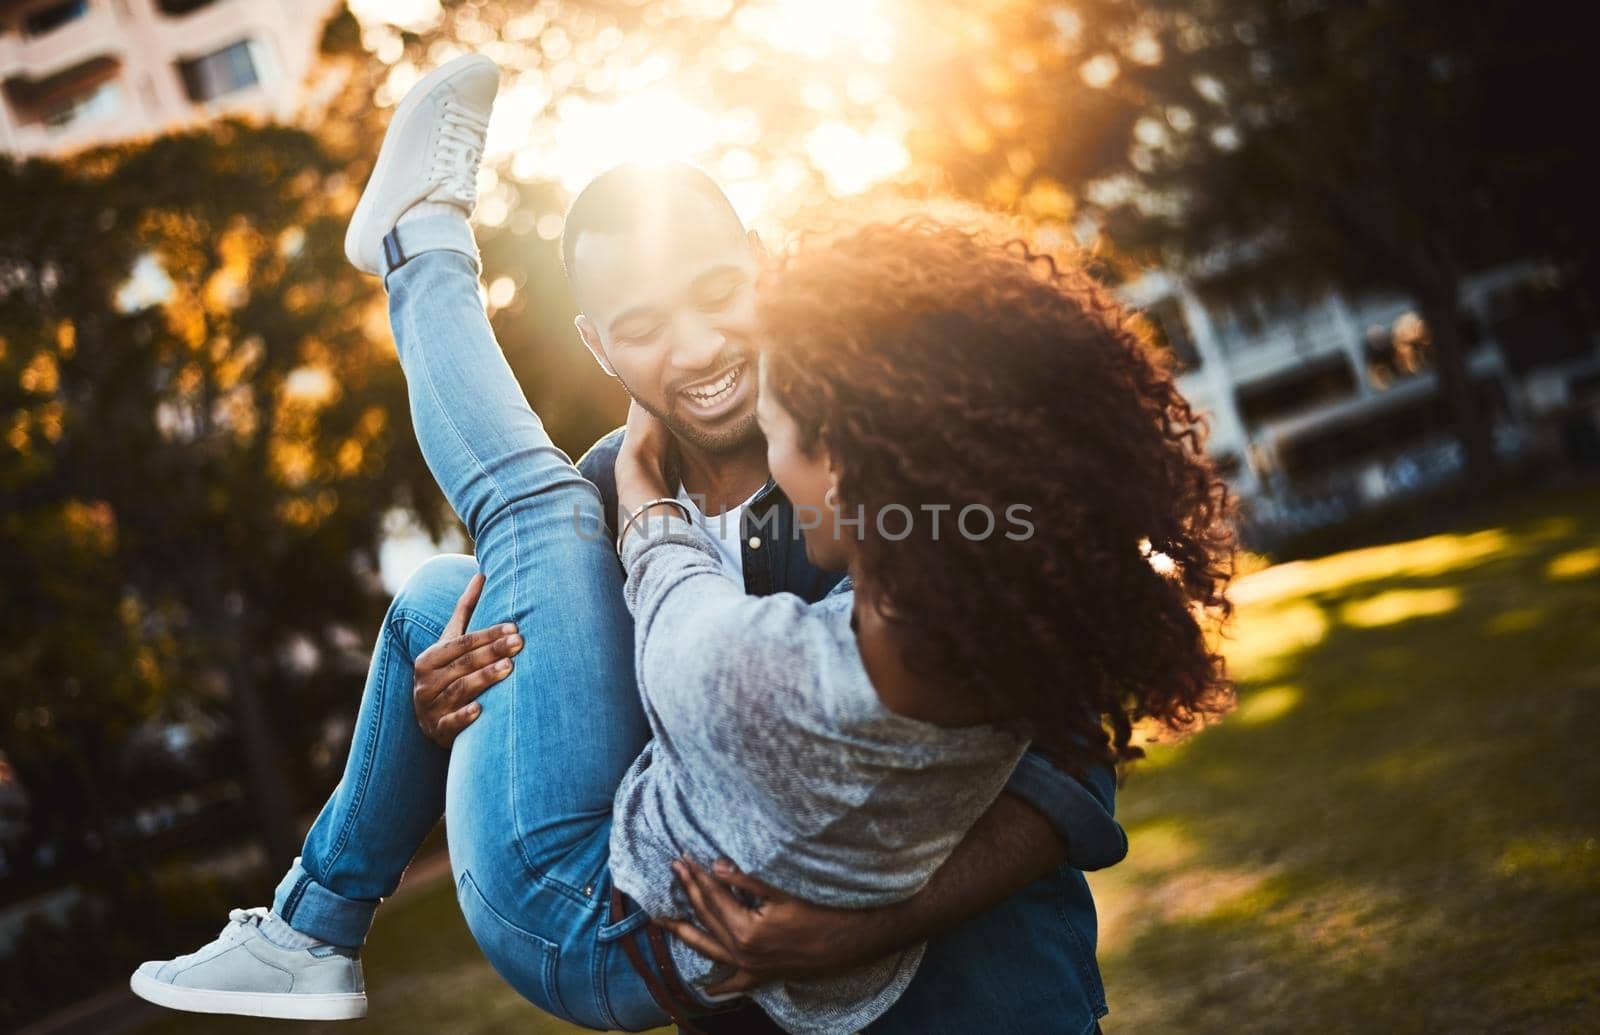 All their days are fun together. Shot of a young couple having fun together outdoors. by YuriArcurs